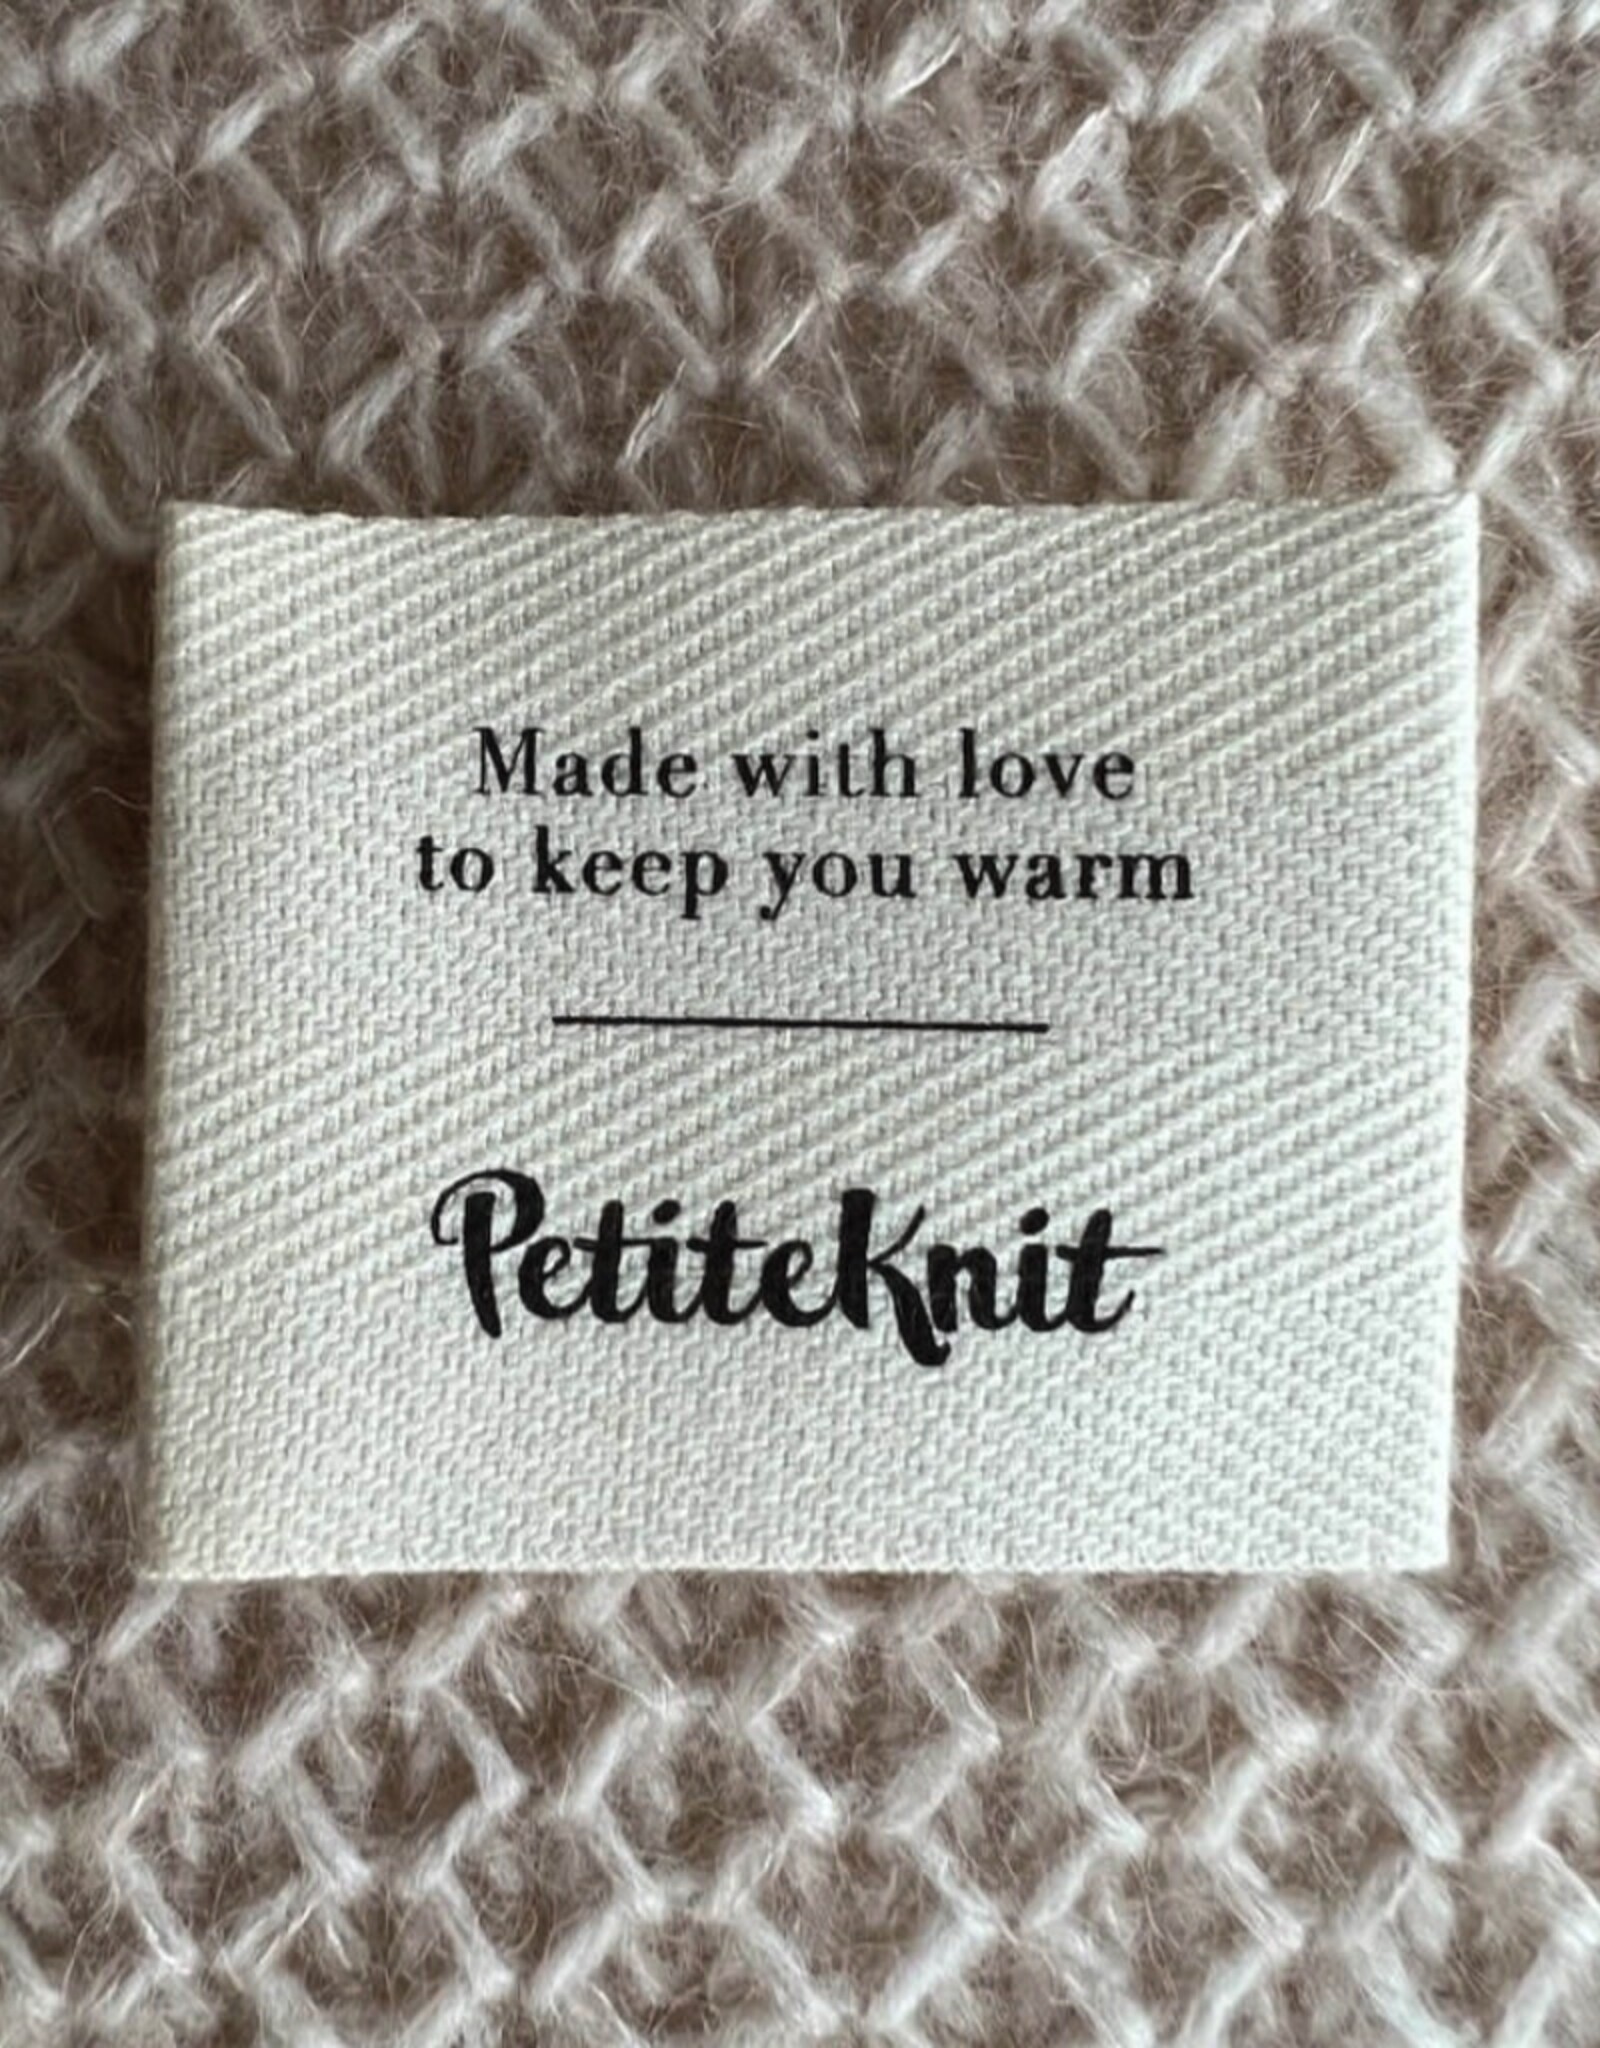 PetiteKnit PetiteKnit “Made with love to keep you warm” Label